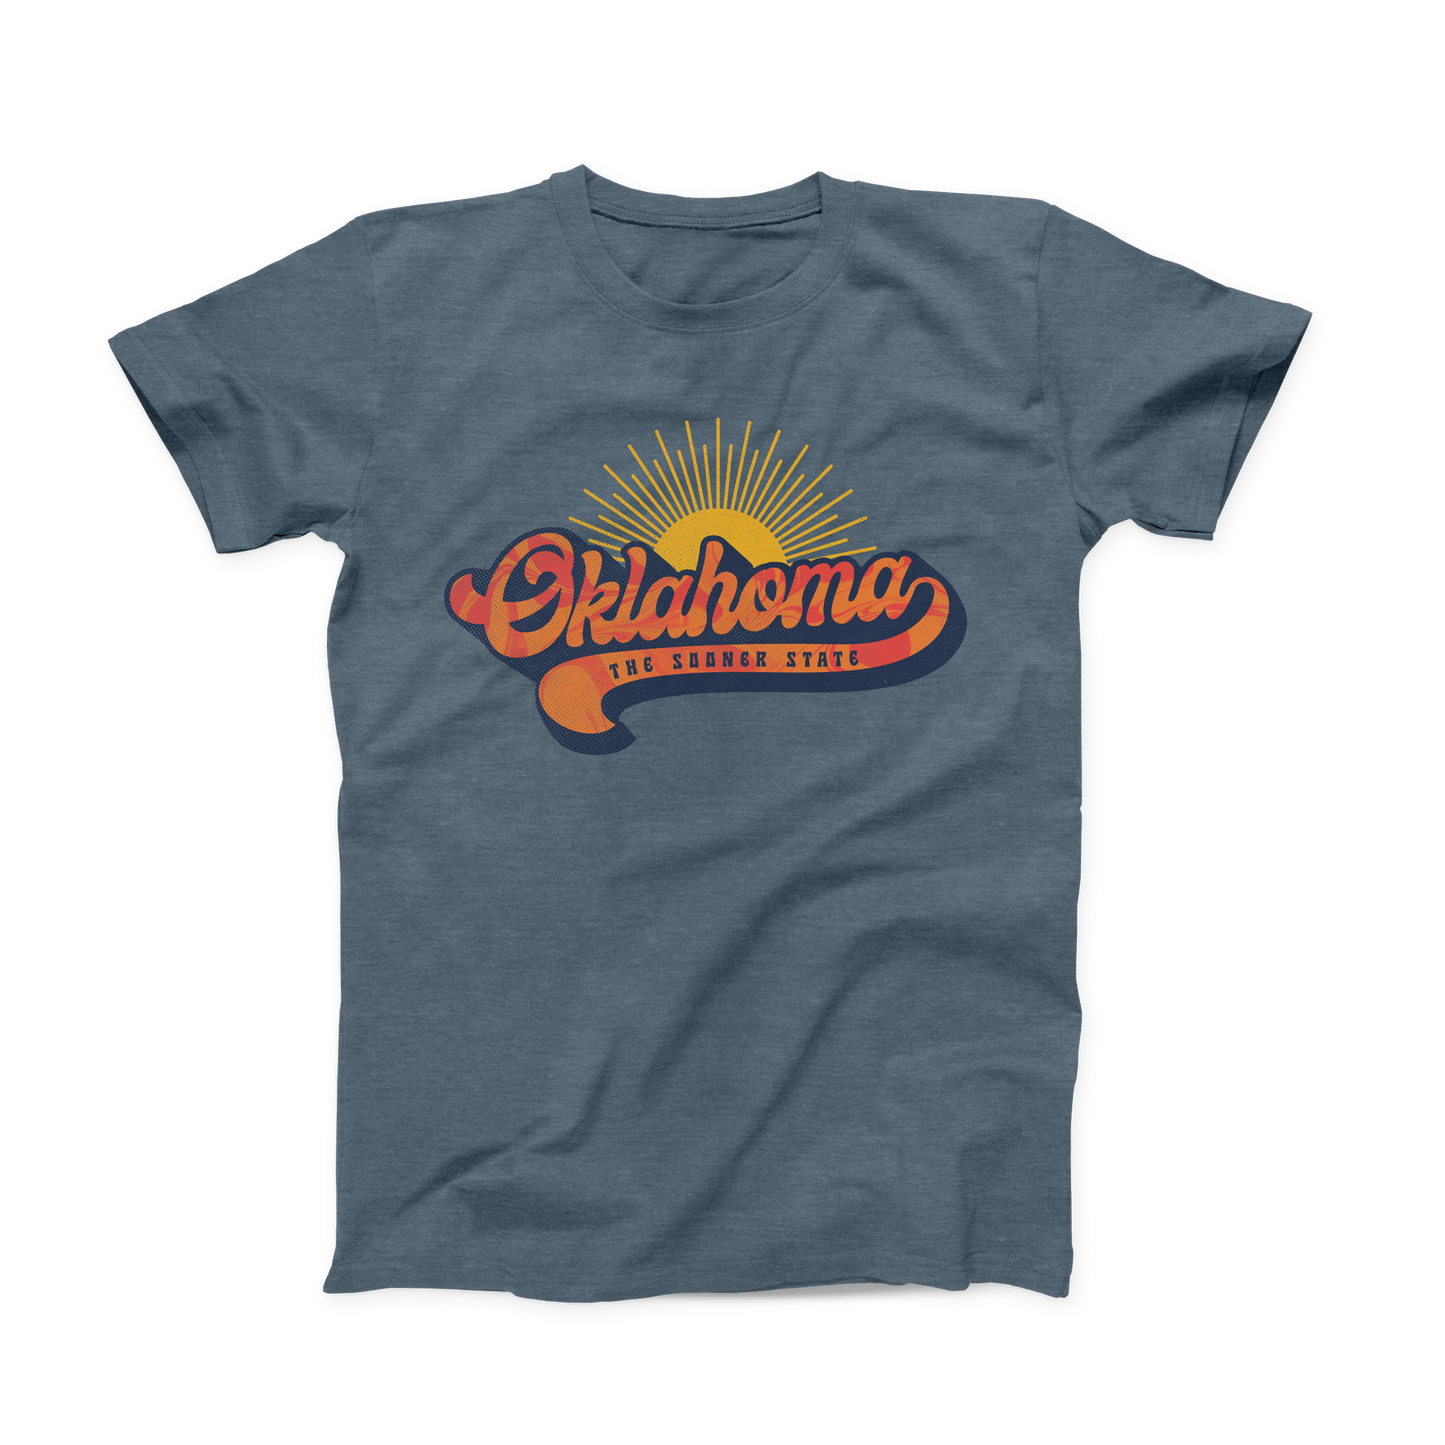 Heather Slate colored Oklahoma T-shirt. Screen printed across the chest in yellow, orange, red and navy. "Oklahoma" is written is a rounded orange and red font outlined in navy with a yellow sun behind it. "The Sooner State" is listed below in small navy font within the tail of the "a"